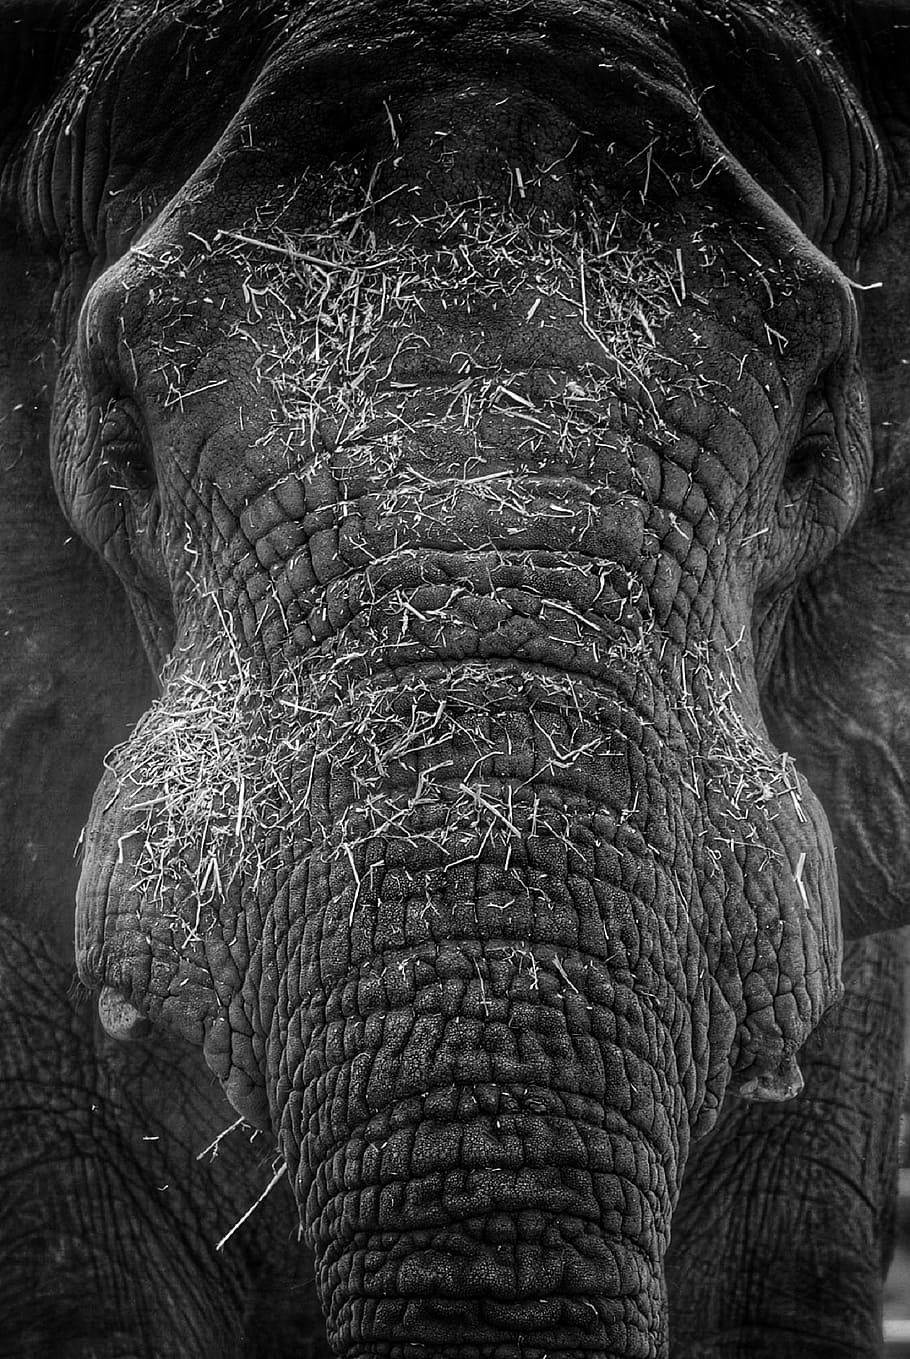 elephant, head, black and white, portrait, wrinkles, trunk, eyes, face, zoo, close up